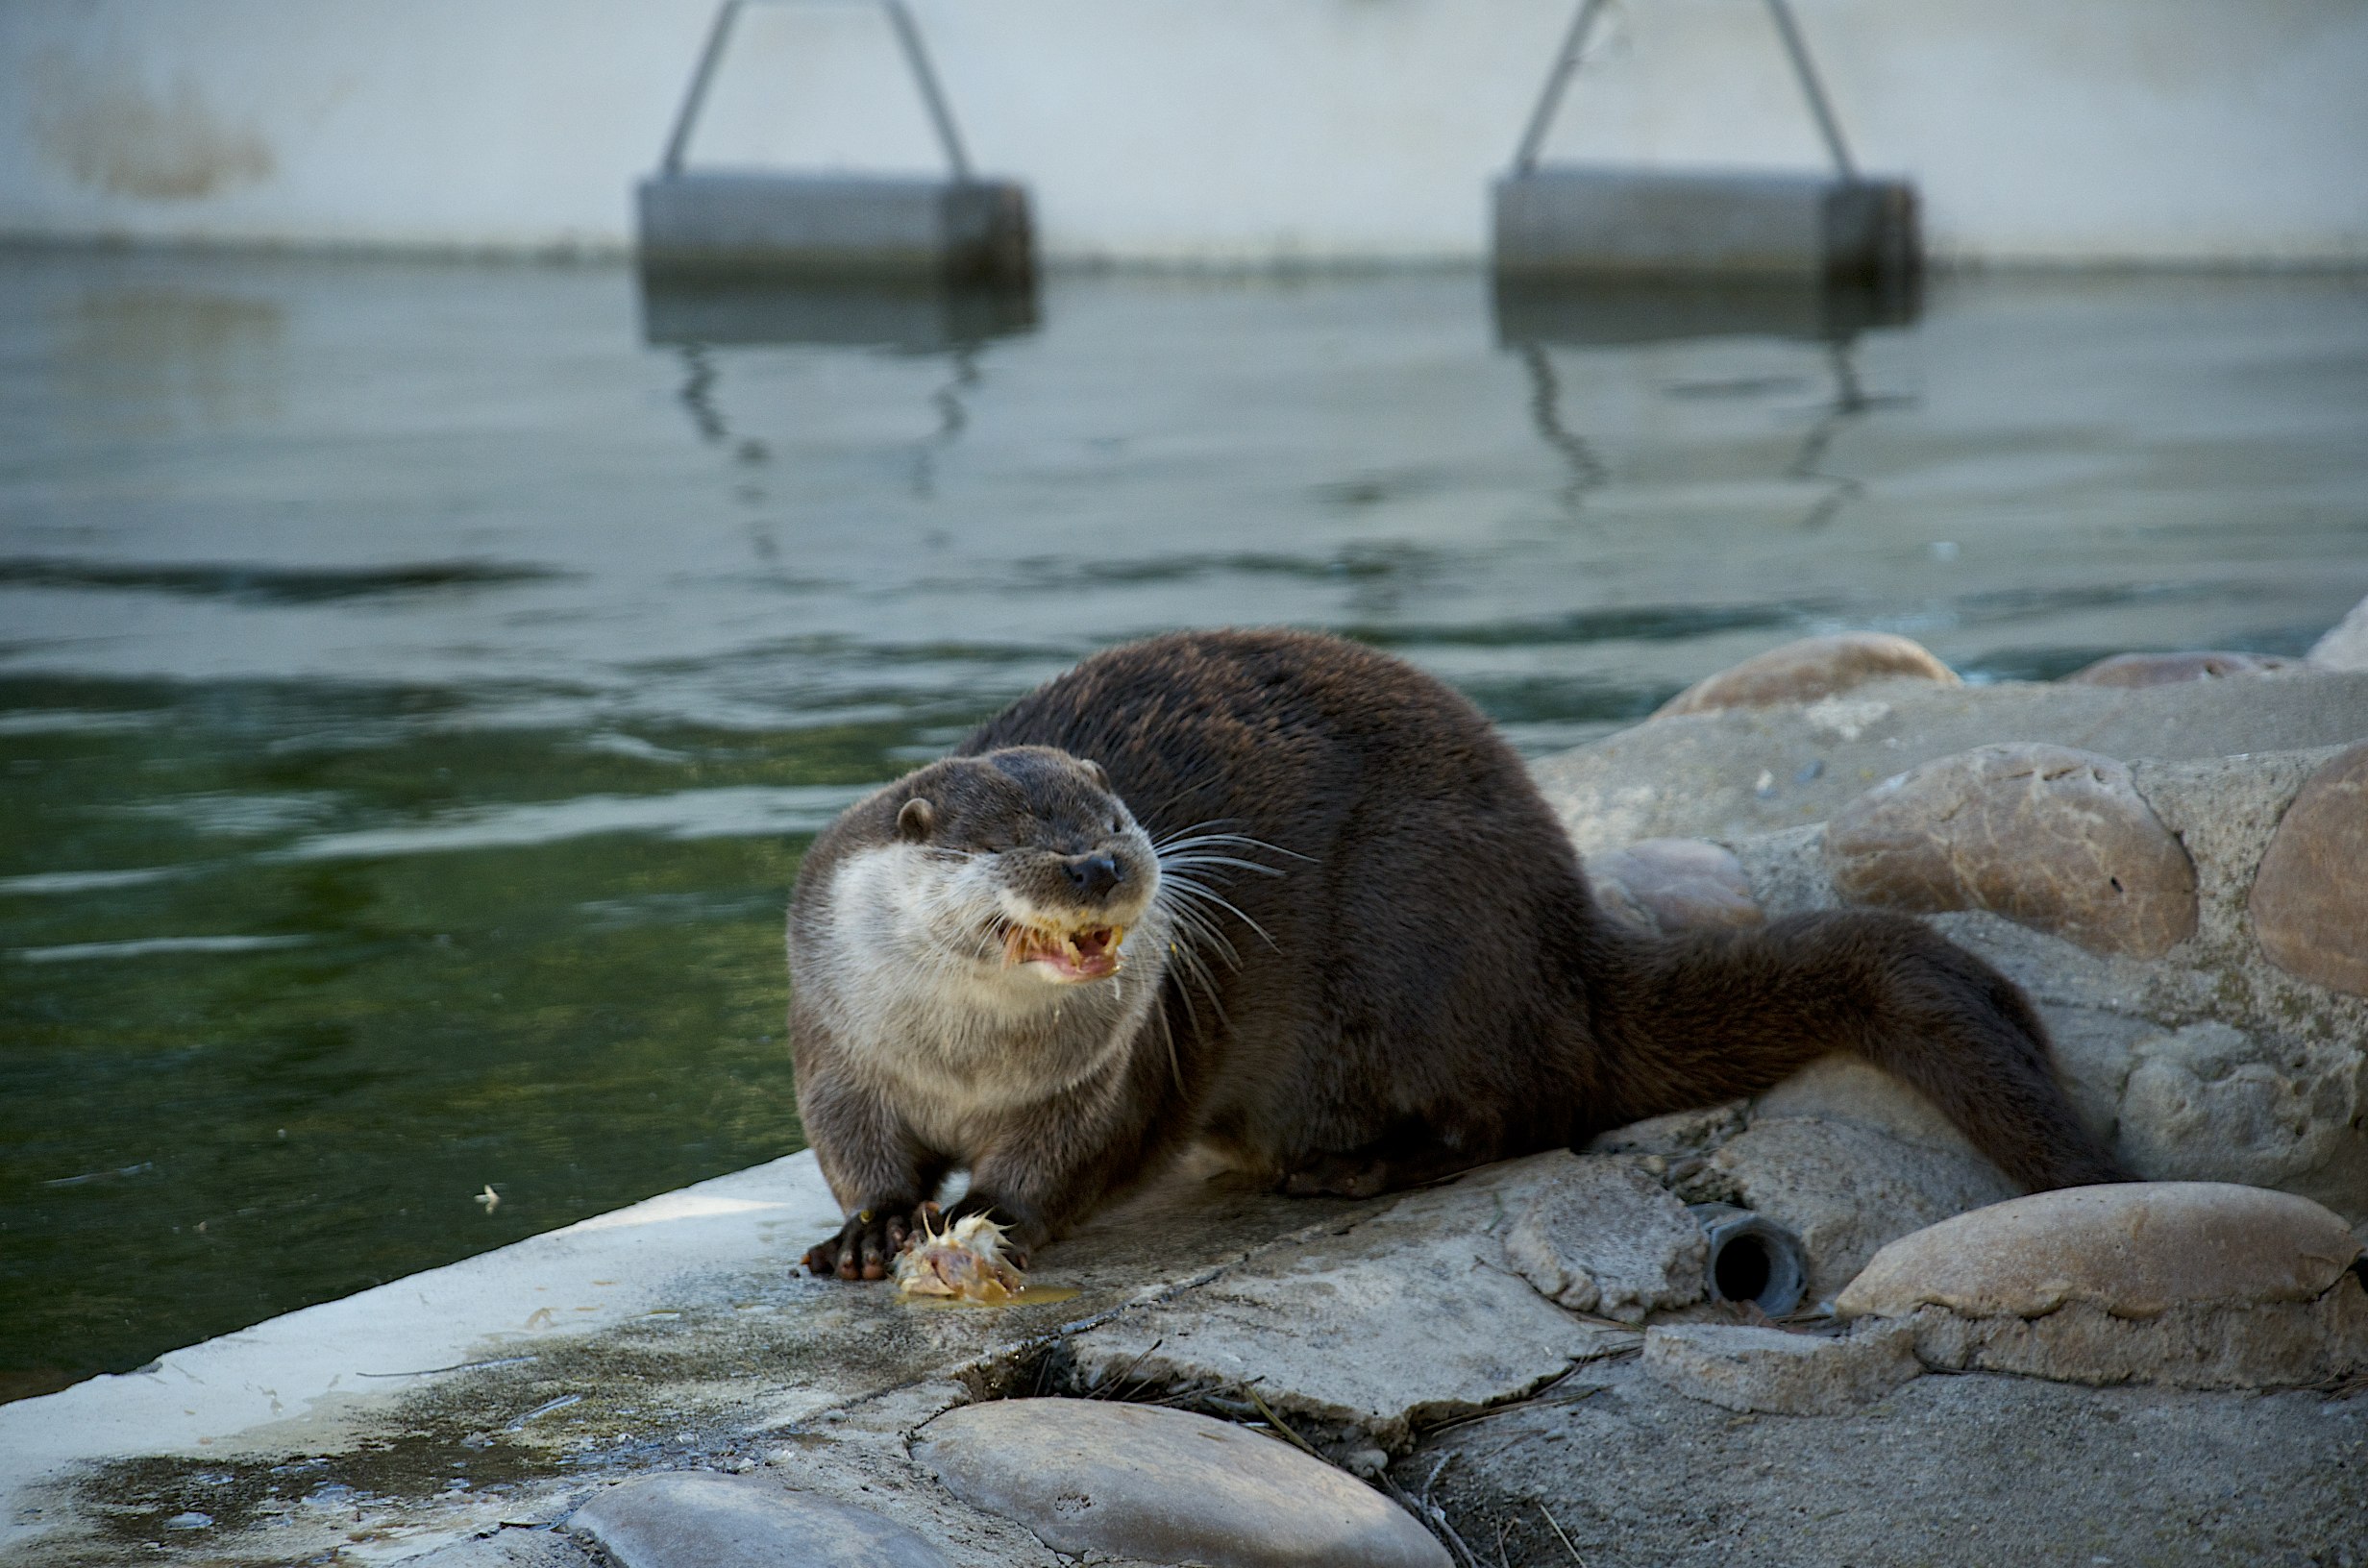 Otter Concentrates Very Hard on Nomming His Food 1